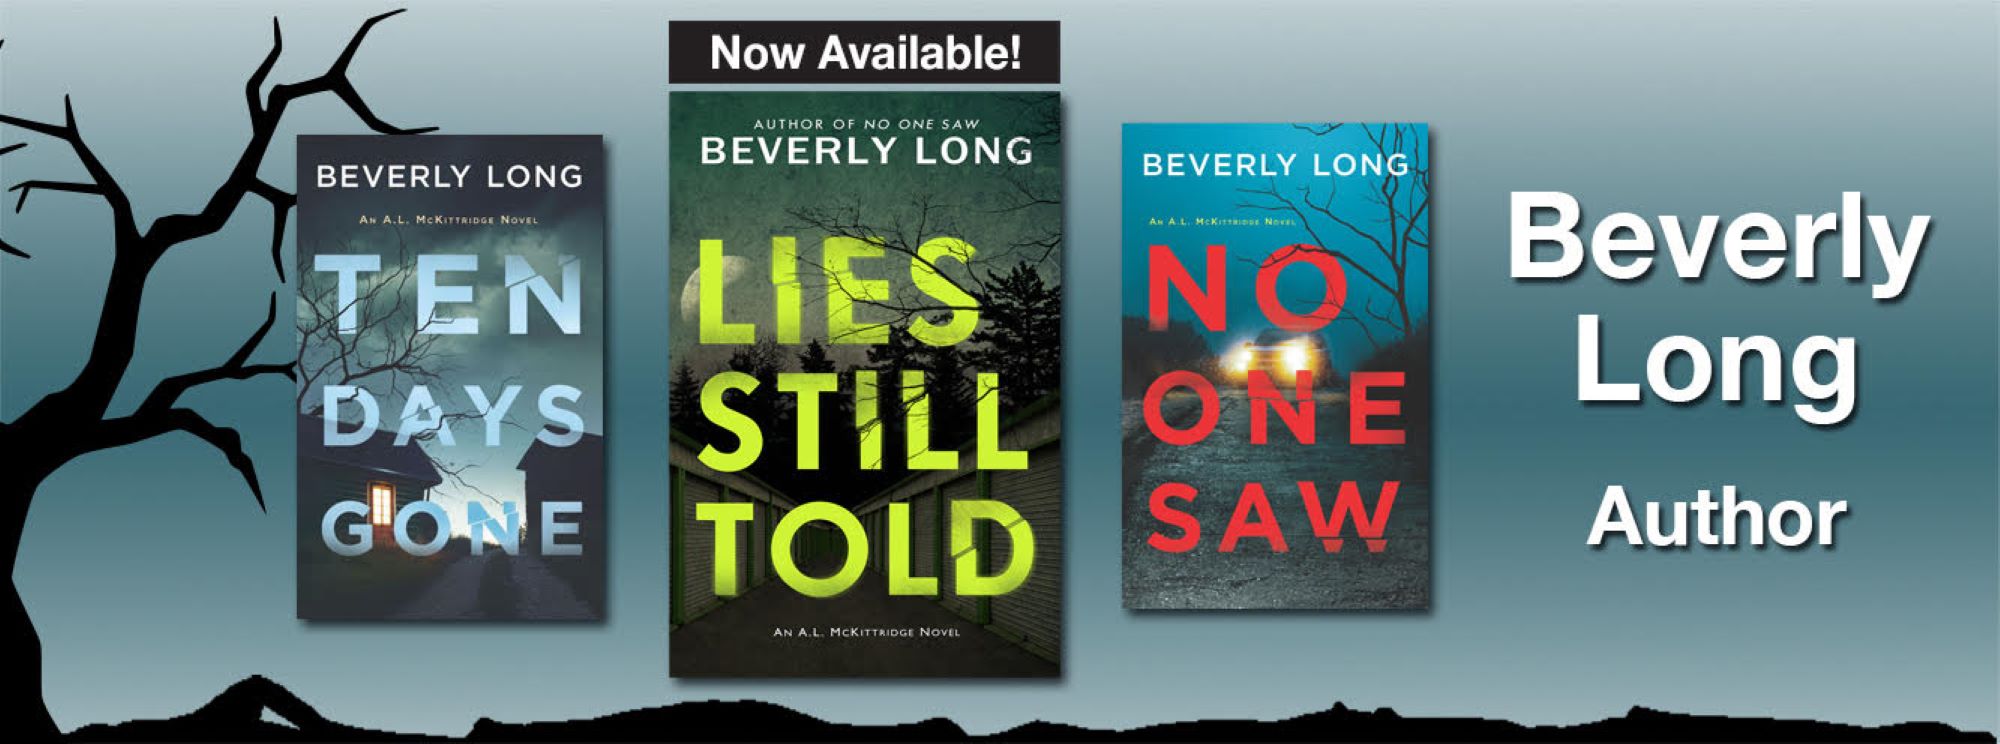 Beverly Long | Author